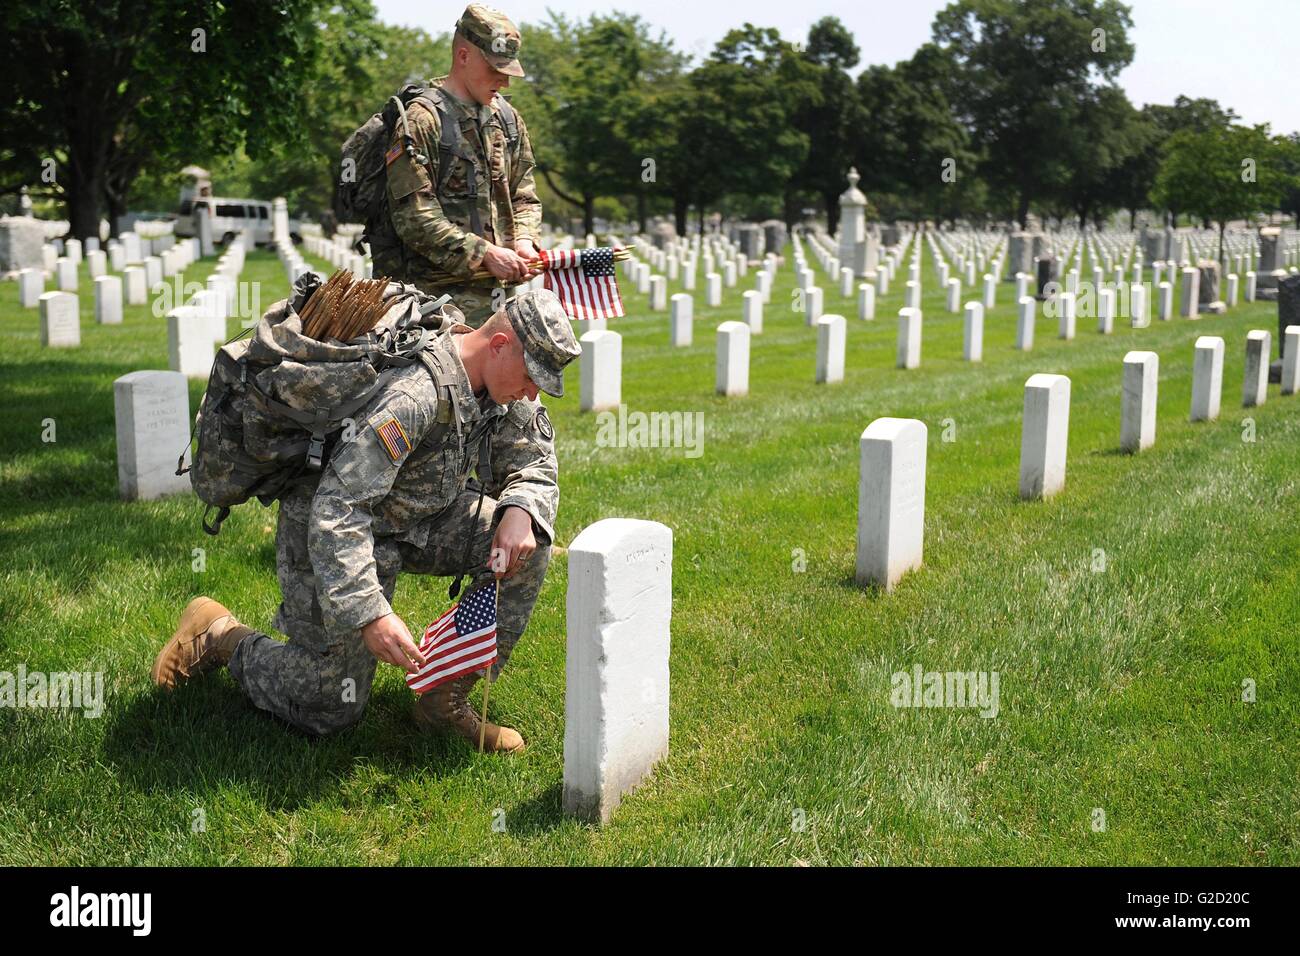 Arlington National Cemetery, Virginia, USA. 27th May, 2016. A U.S soldier with The Old Guard places an American flag in front of a grave stone in Arlington National Cemetery in honor of Memorial Day May 27, 2016 in Arlington, Virginia This tradition, known as 'Flags In,' has been conducted annually since The Old Guard was designated as the Army's official ceremonial unit in 1948. Credit:  Planetpix/Alamy Live News Stock Photo